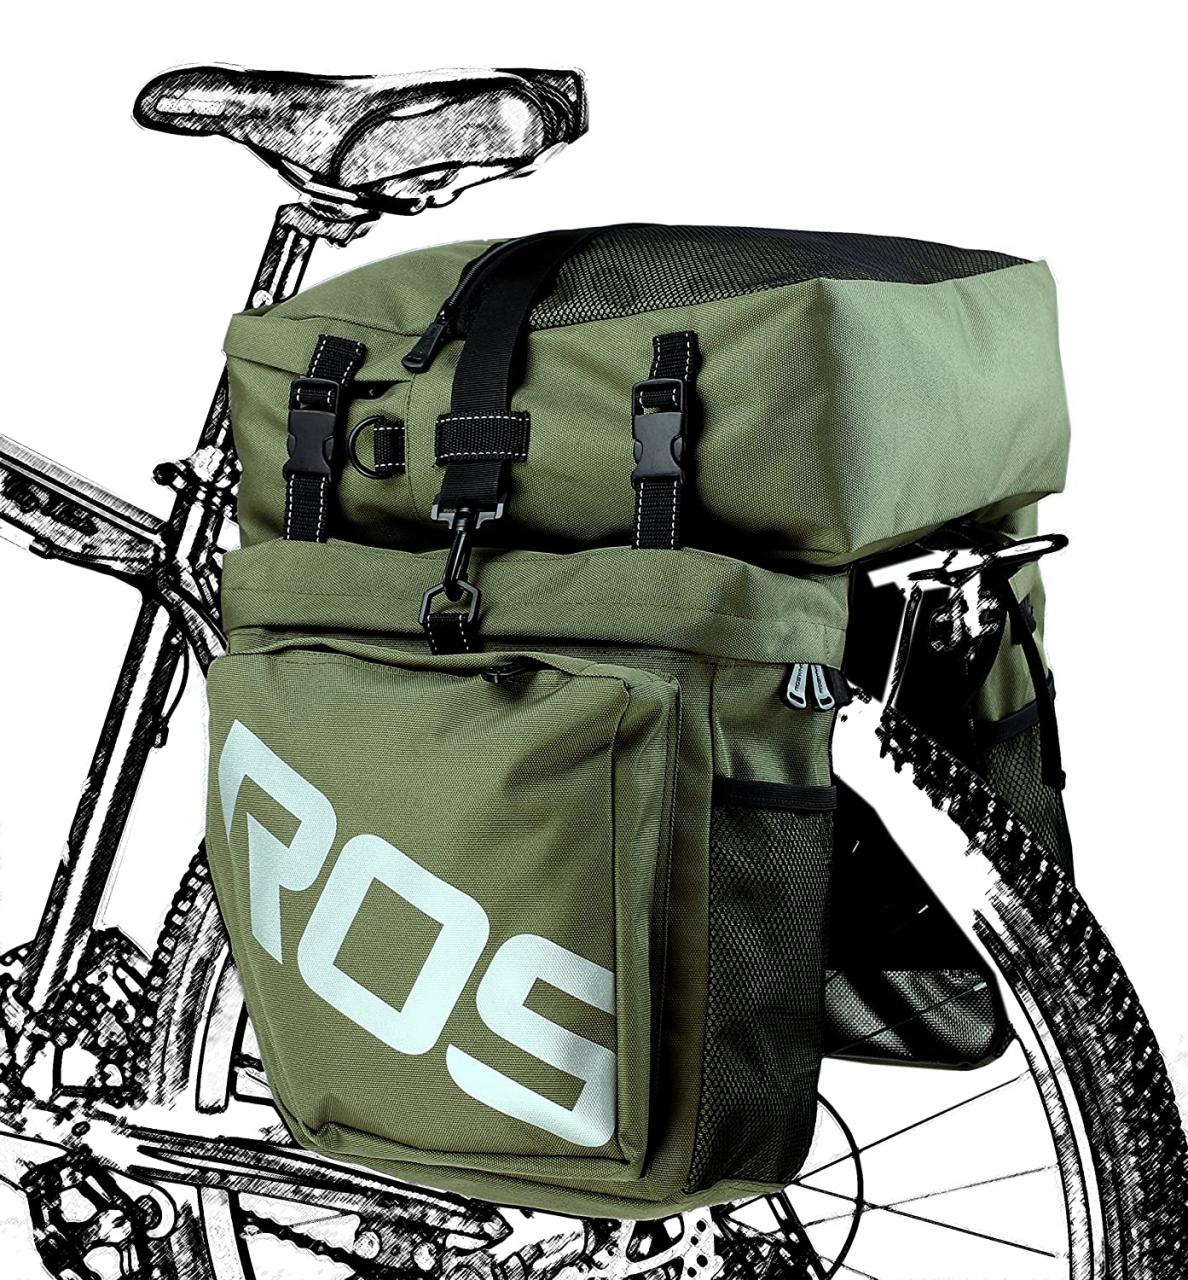 Buy Roswheel 14892 3 in 1 Multifuction Bicycle Expedition Touring Cam  Pannier Online in Vietnam. B06XPX4JBC